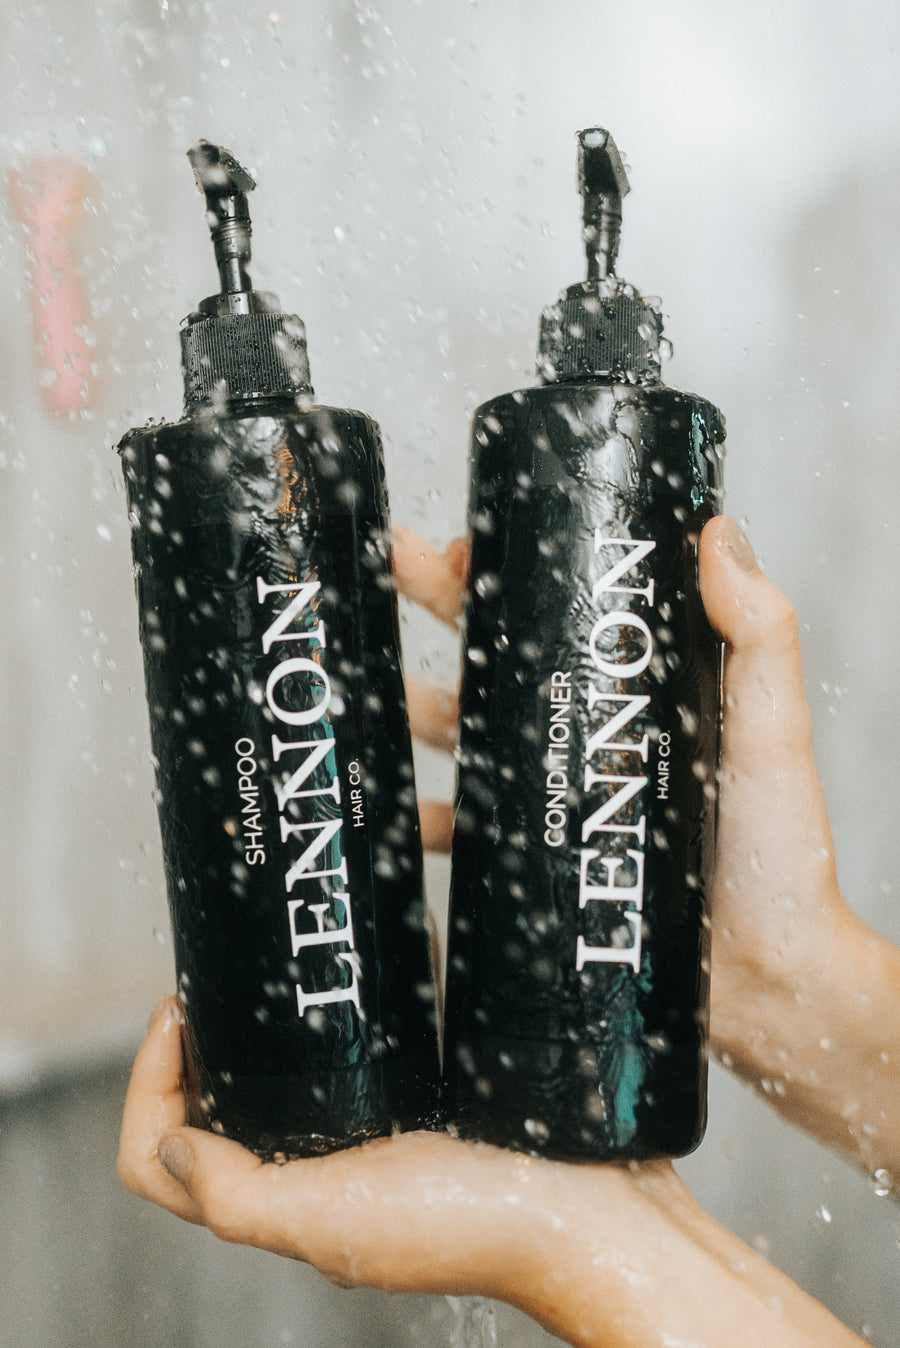 Lennon Shampoo and Conditioner          (Shipping will be 2-3 weeks with this restock)